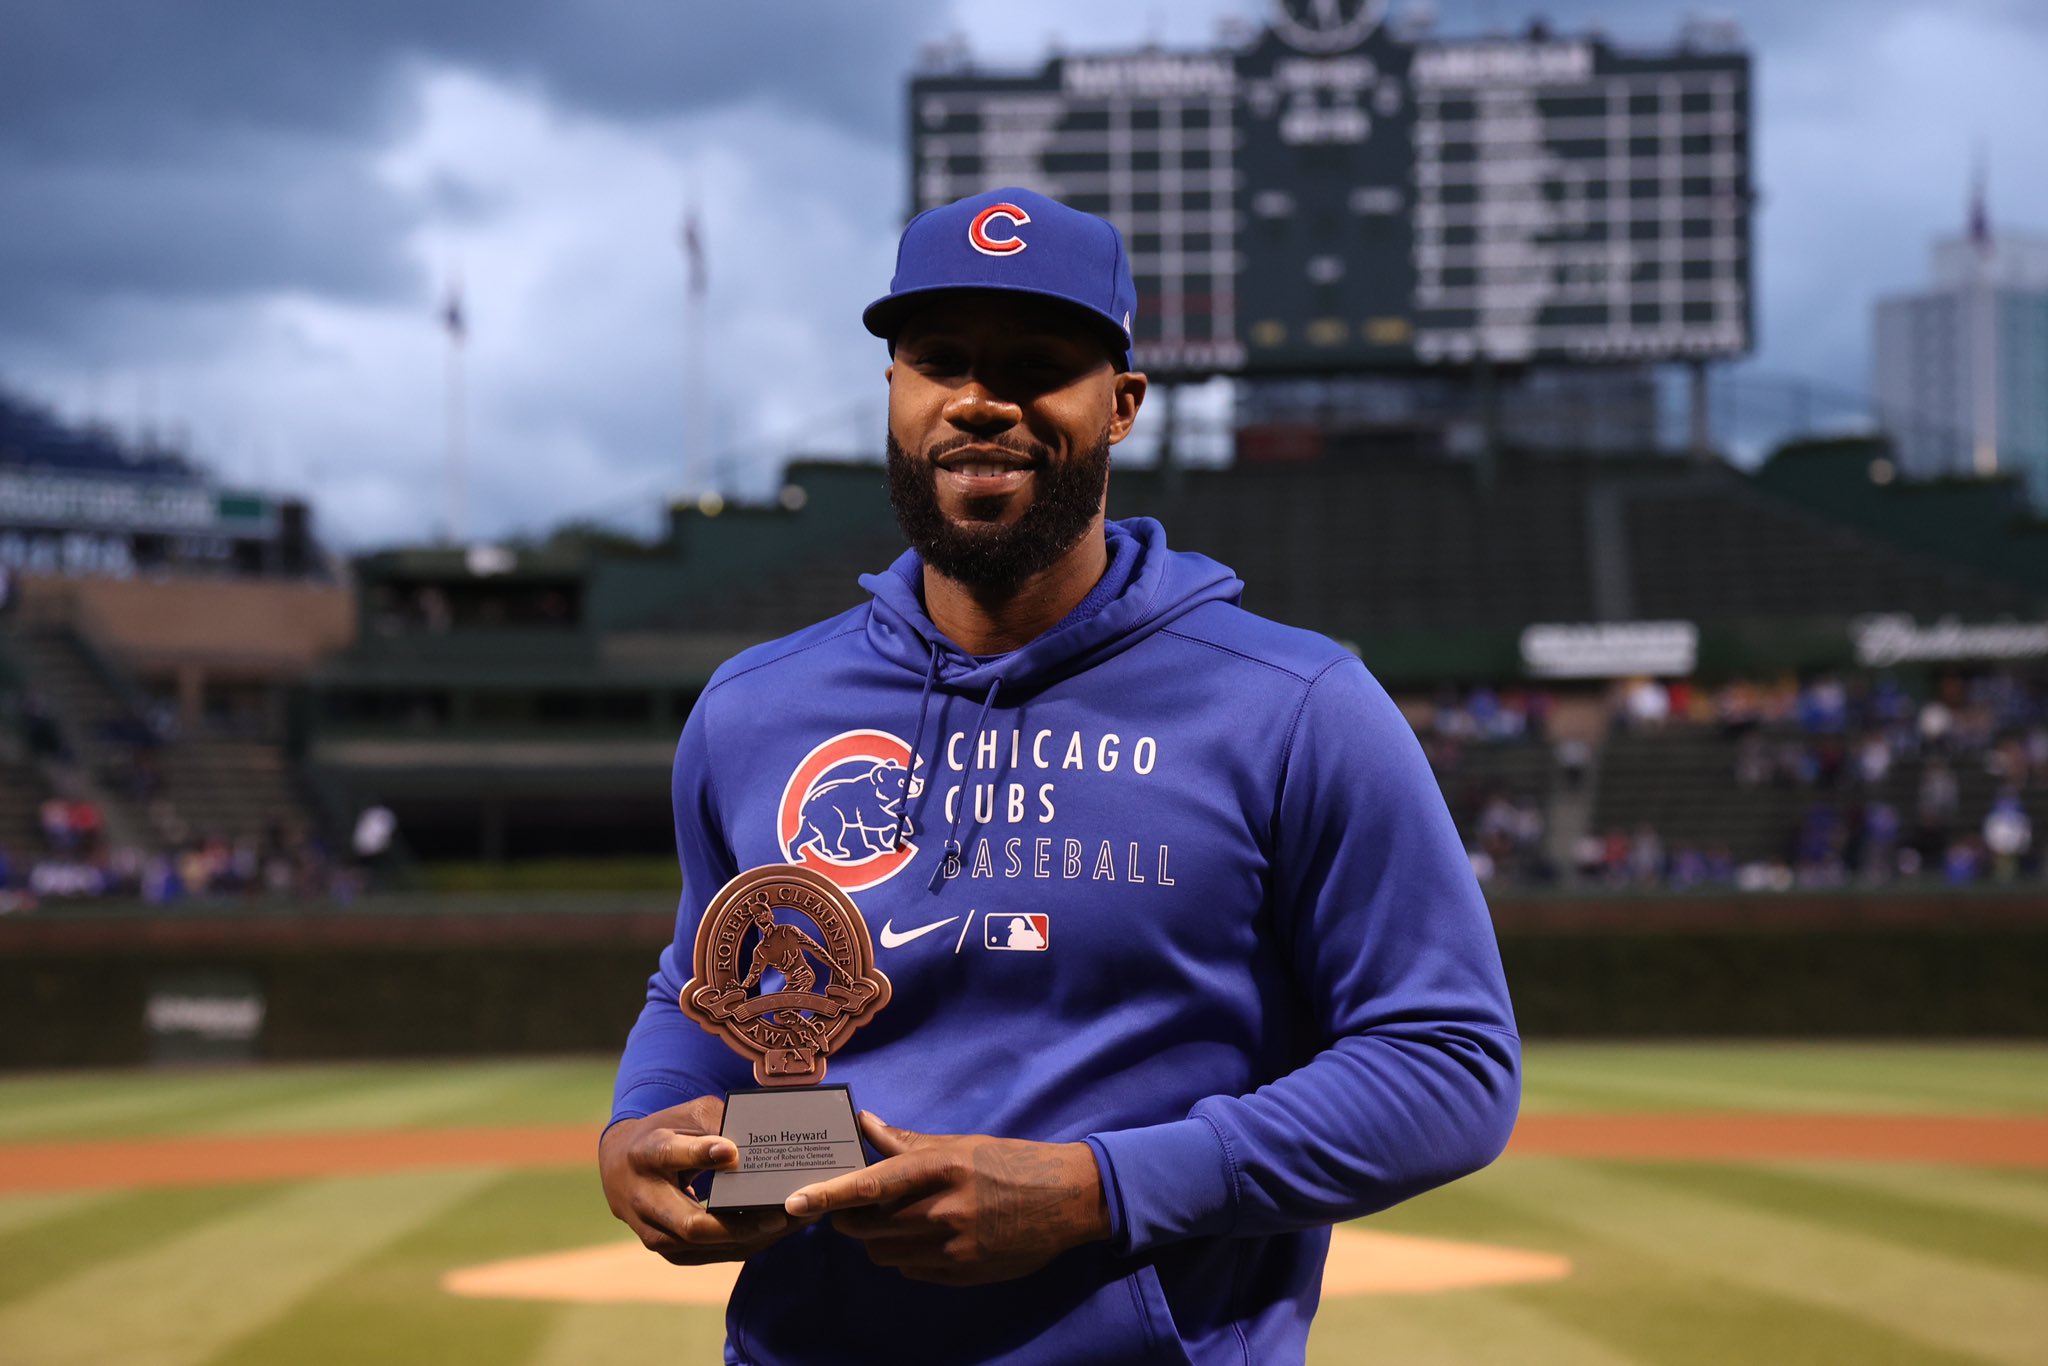 Chicago Cubs on X: Jason's actions and leadership reflect his